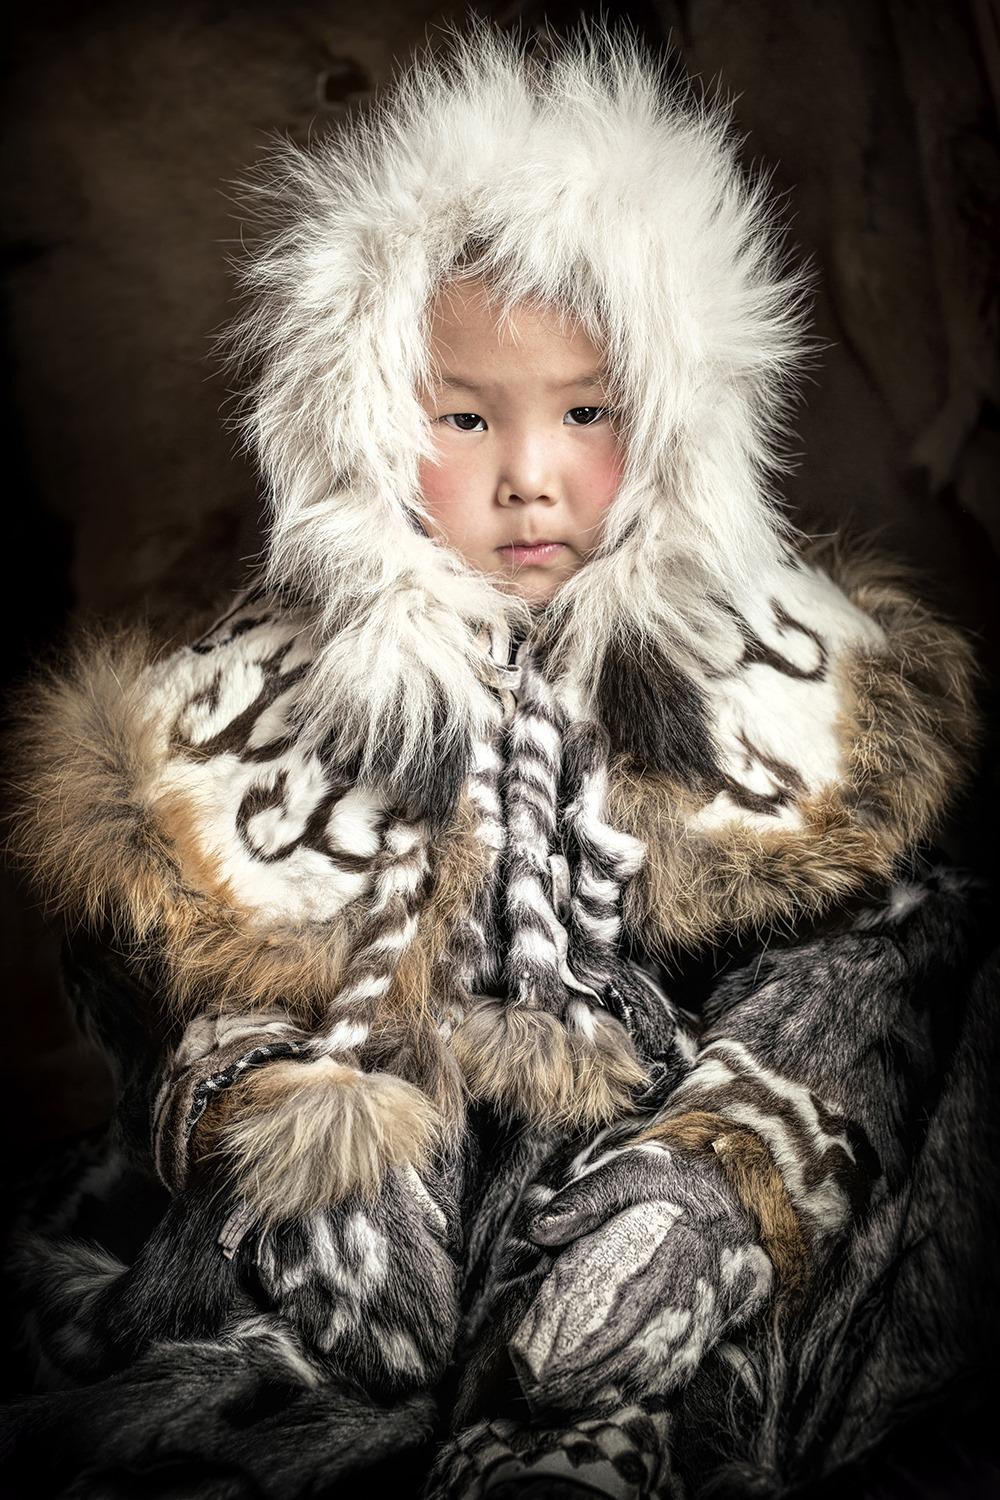 Portrait of an E'ven indigenous girl from Sakha (Yakutia) Republic (© <a href="https://www.facebook.com/xperimenter">Alexander Khimushin</a> / The World In Faces)